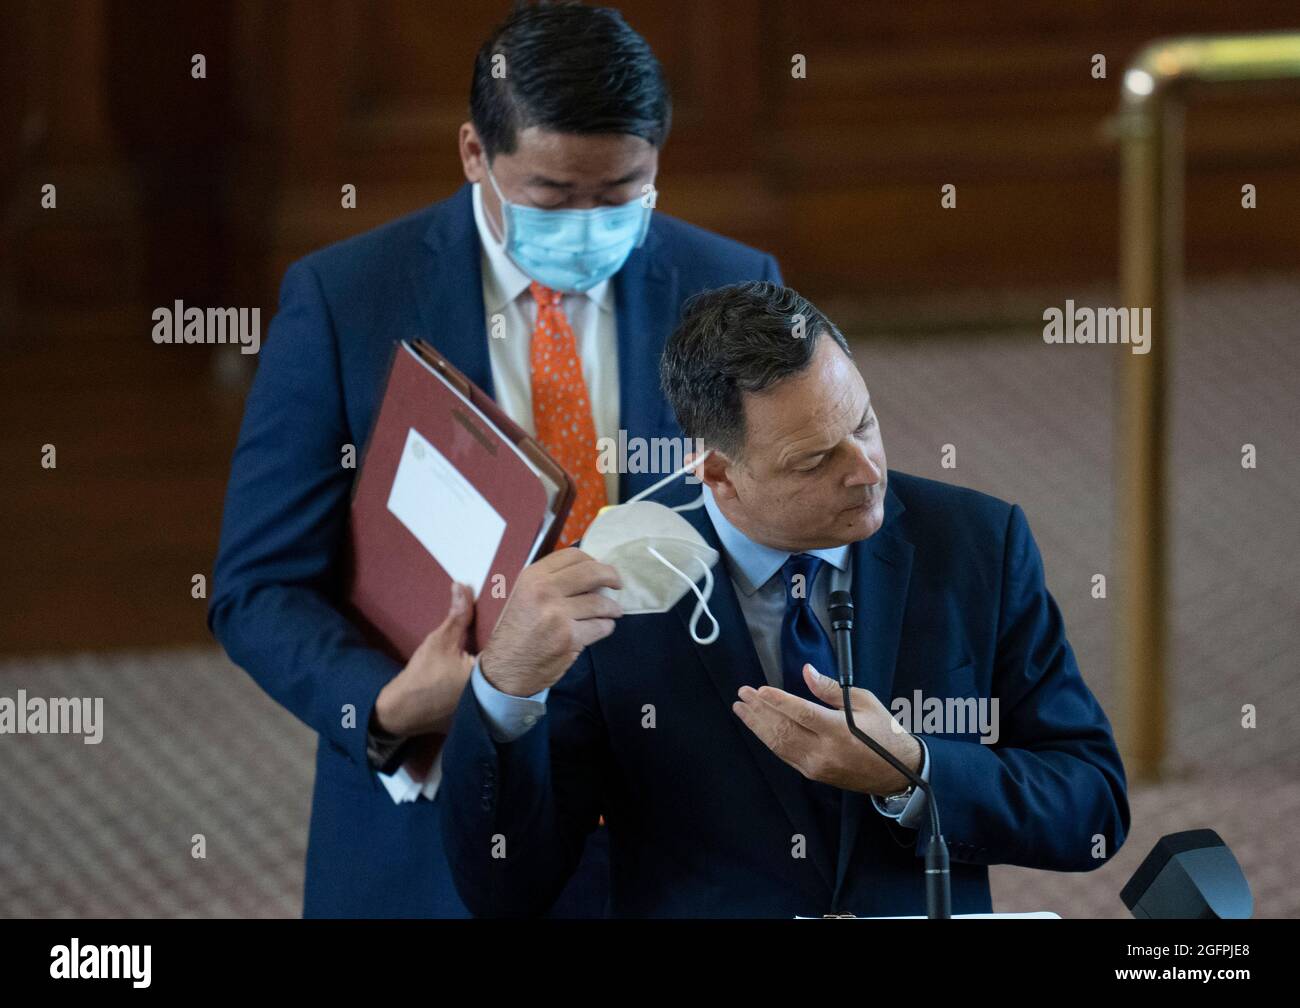 Austin Texas USA, Aug. 26, 2021: Rep. Rafael Anchia, D-Dallas, removes his mask as the Texas House debates SB 1, a Republican-led measure that would tighten voting procedures in Texas including a ban on 24-hour voting and mail-in ballot restrictions. In the back is Rep. Gene Wu, D-Houston. Credit: Bob Daemmrich/Alamy Live News Stock Photo